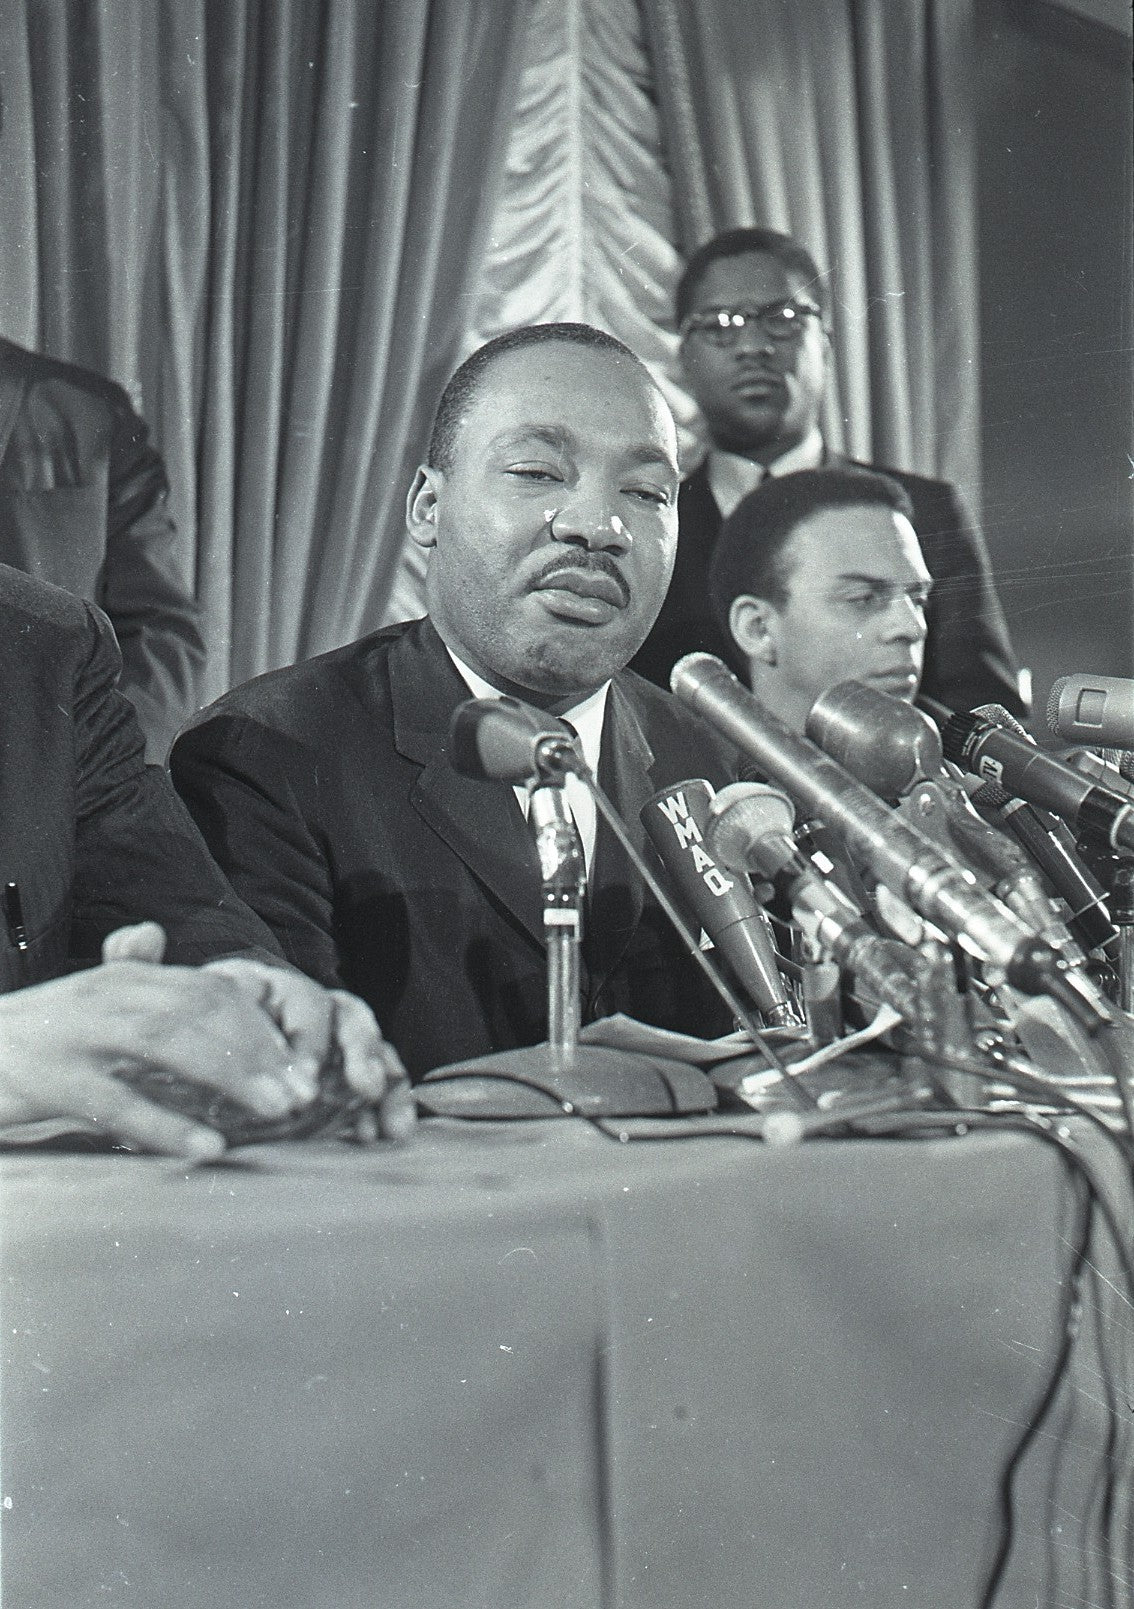 Martin Luther King at 1966 Chicago Freedom Movement (2 35mm negatives) Civil Rights MLK